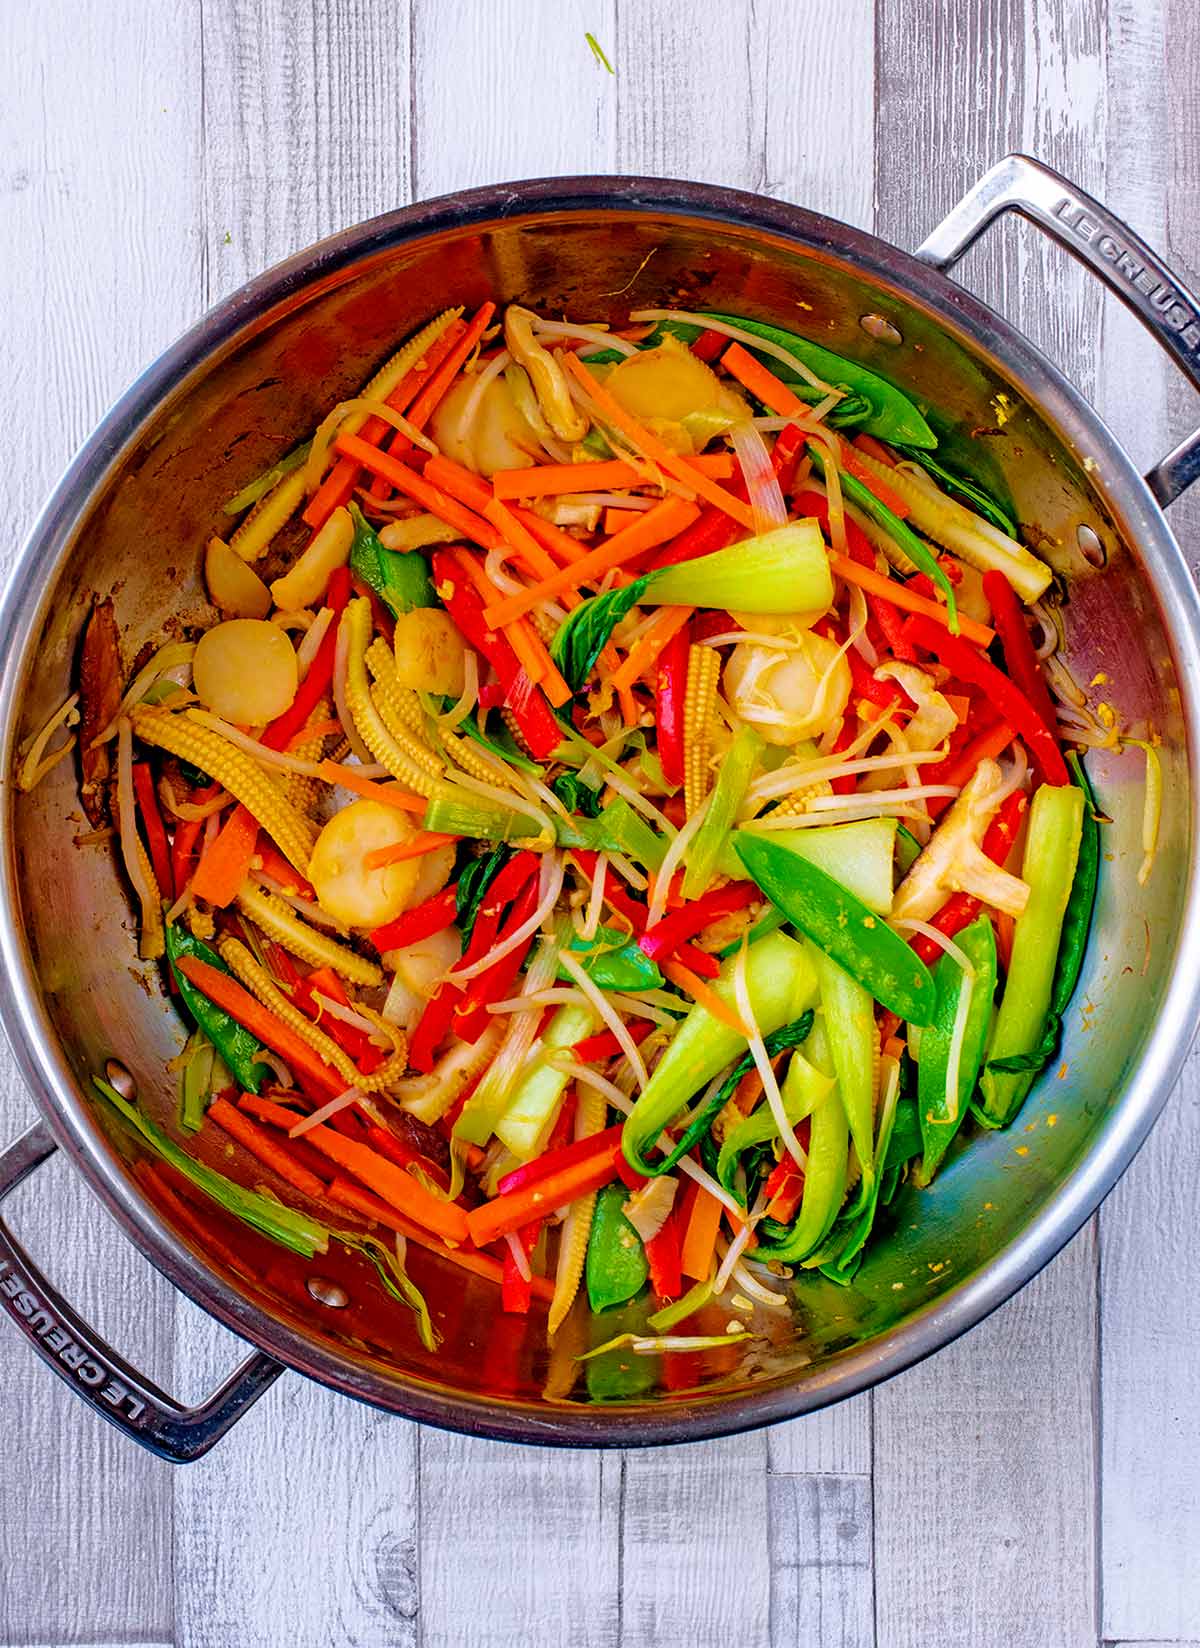 A large silver pan with all the sliced vegetables cooking in it.